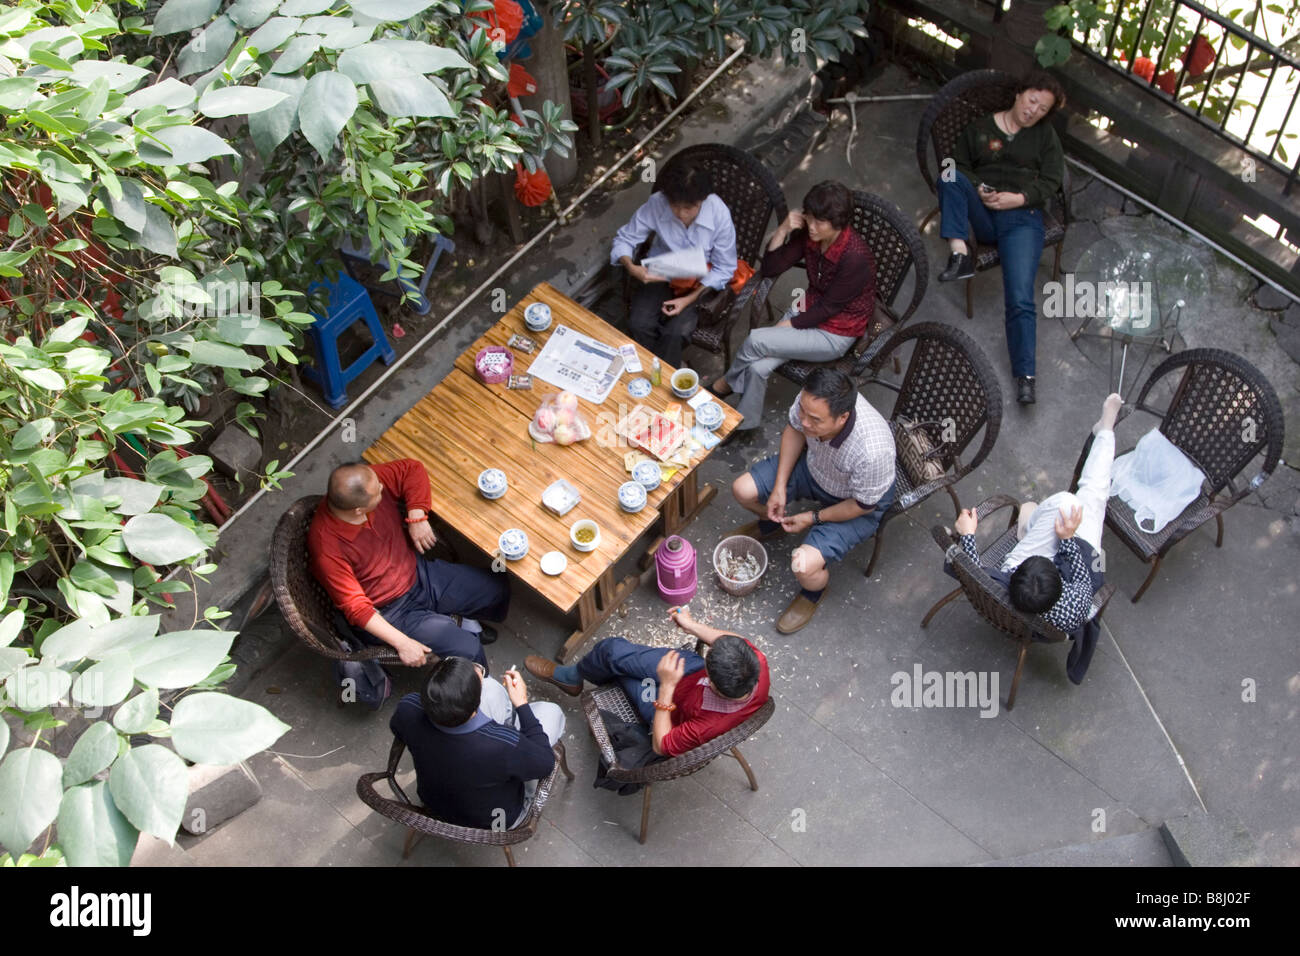 Local people lounging in the coutryard of a teahouse in Chengdu Sichuan China Stock Photo